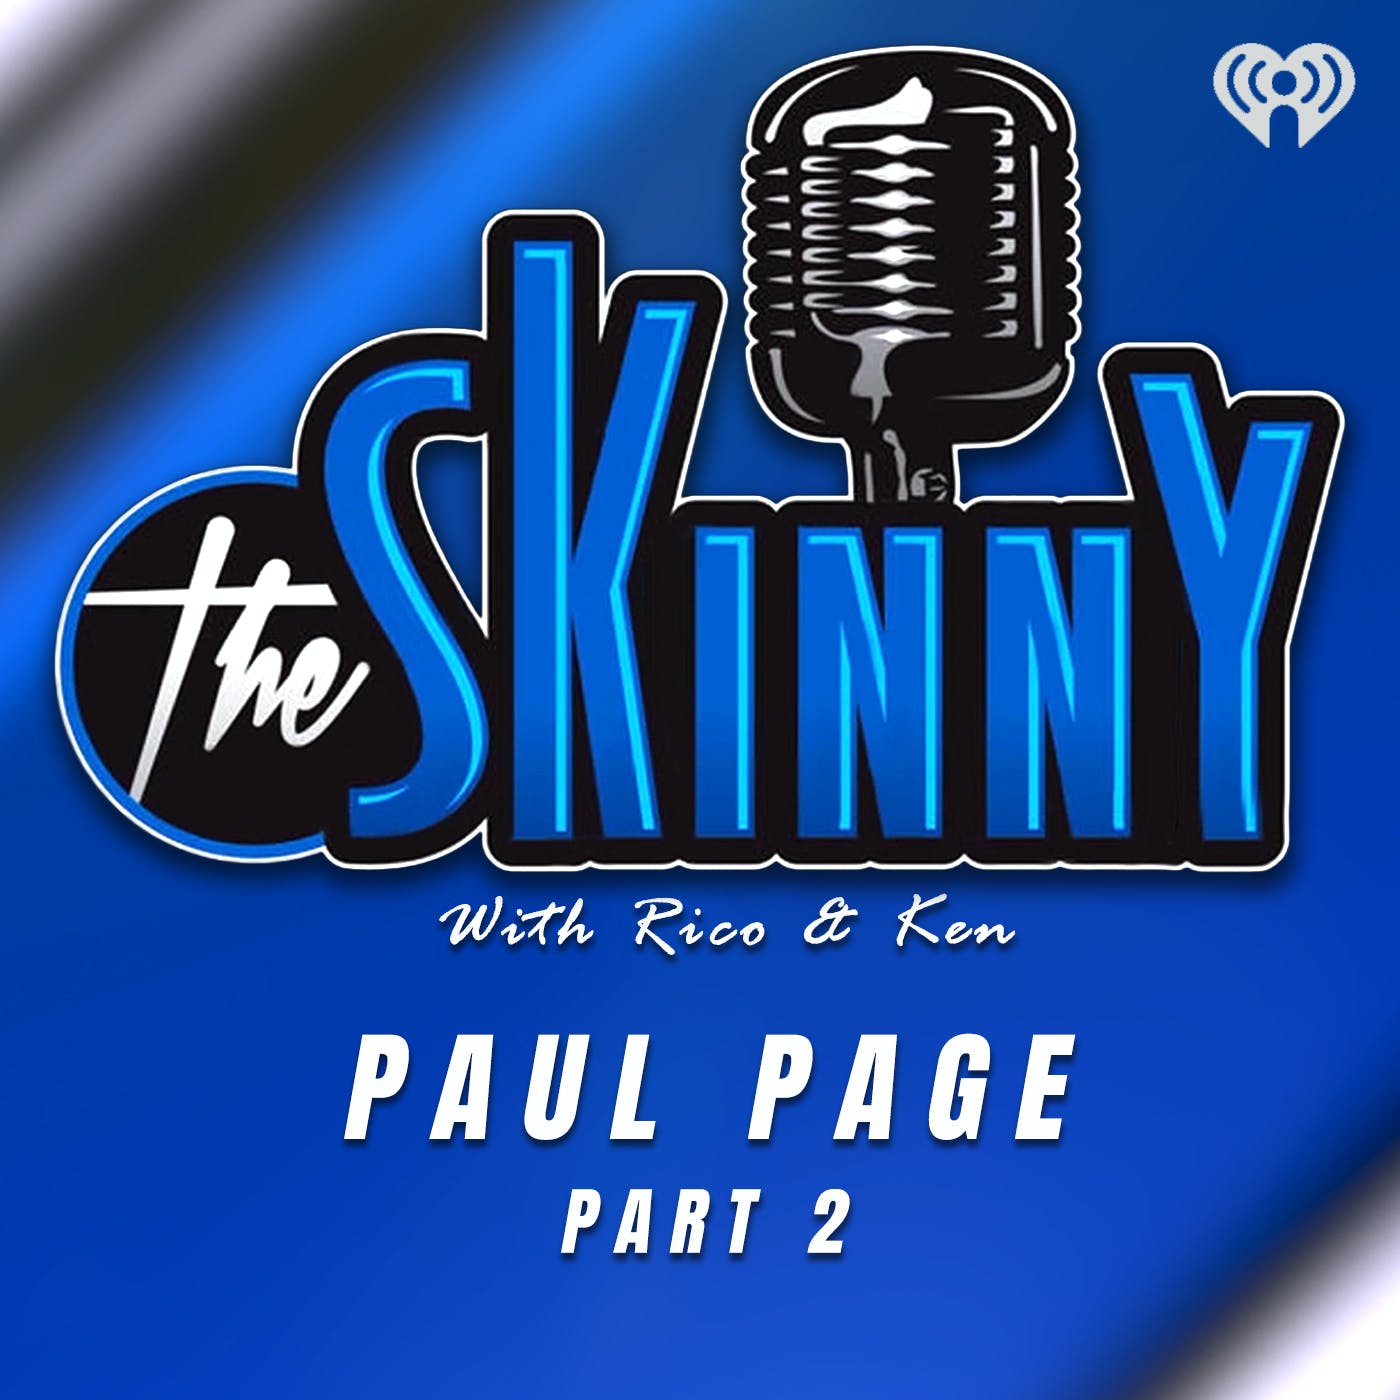 Paul Page joins The Skinny with Rico and Ken-part 2